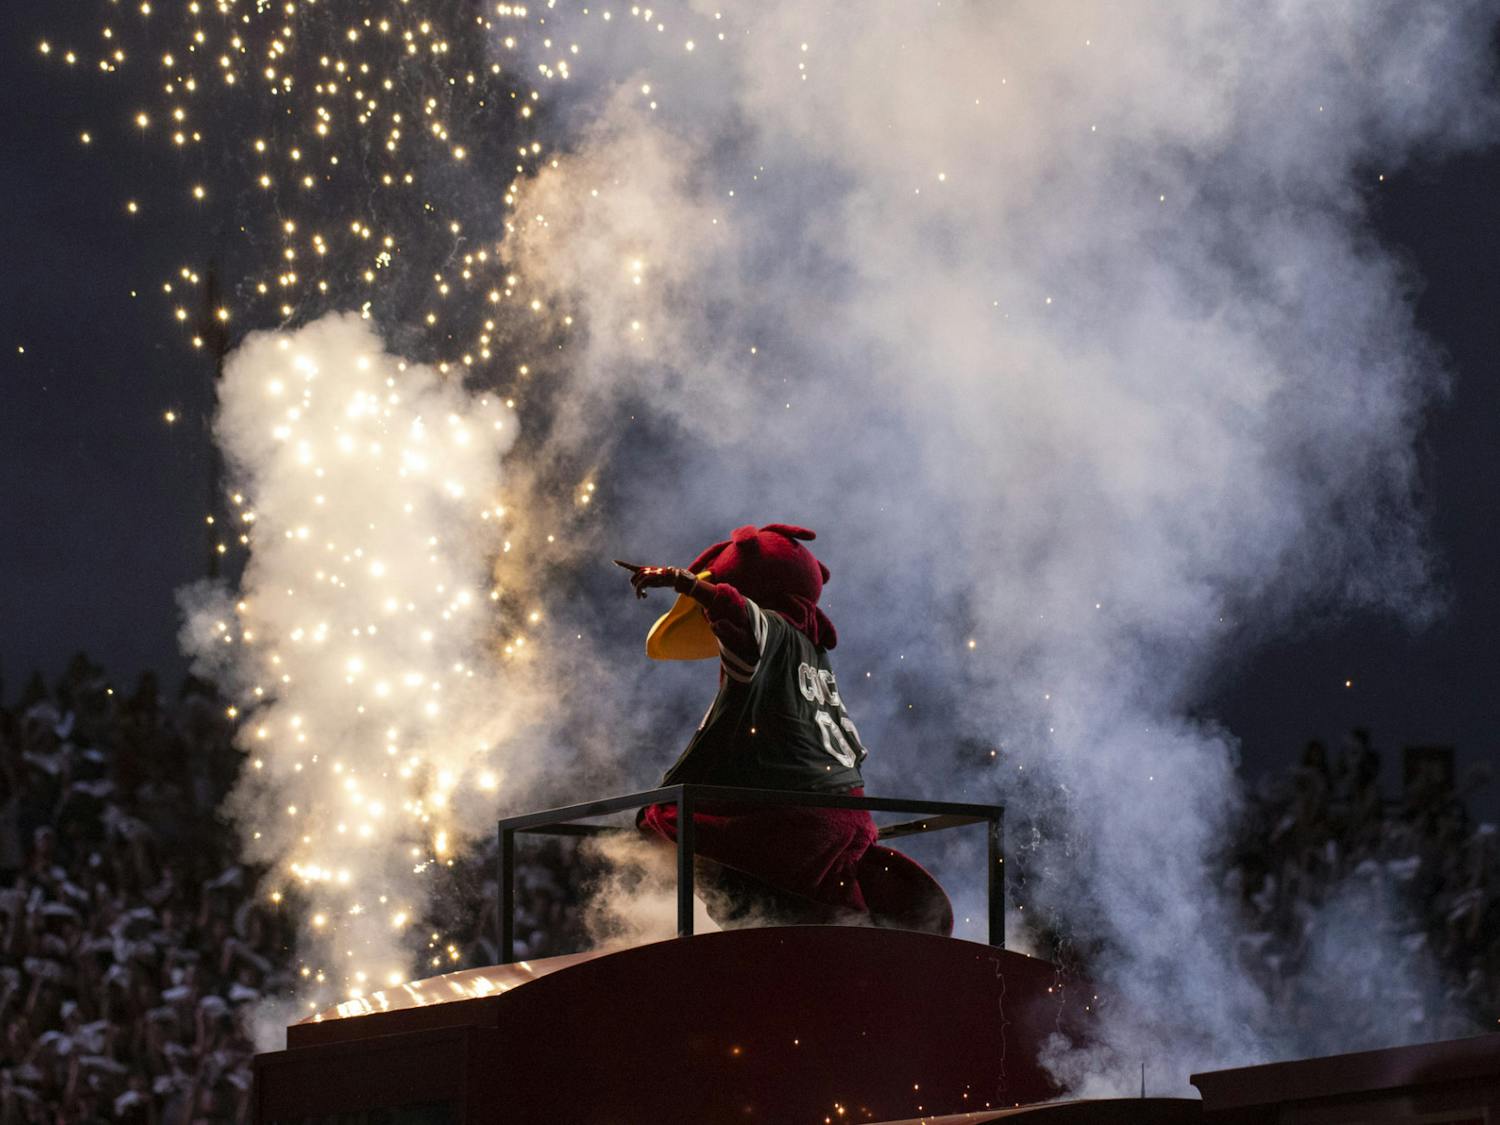 The Gamecocks’ mascot, Cocky, makes his grand entrance out of the "Cockaboose" train to the sound of the 2001 Space Odyssey theme at Williams-Brice Stadium on Sept. 23, 2023. Cocky received a new entrance for the 2023 season.